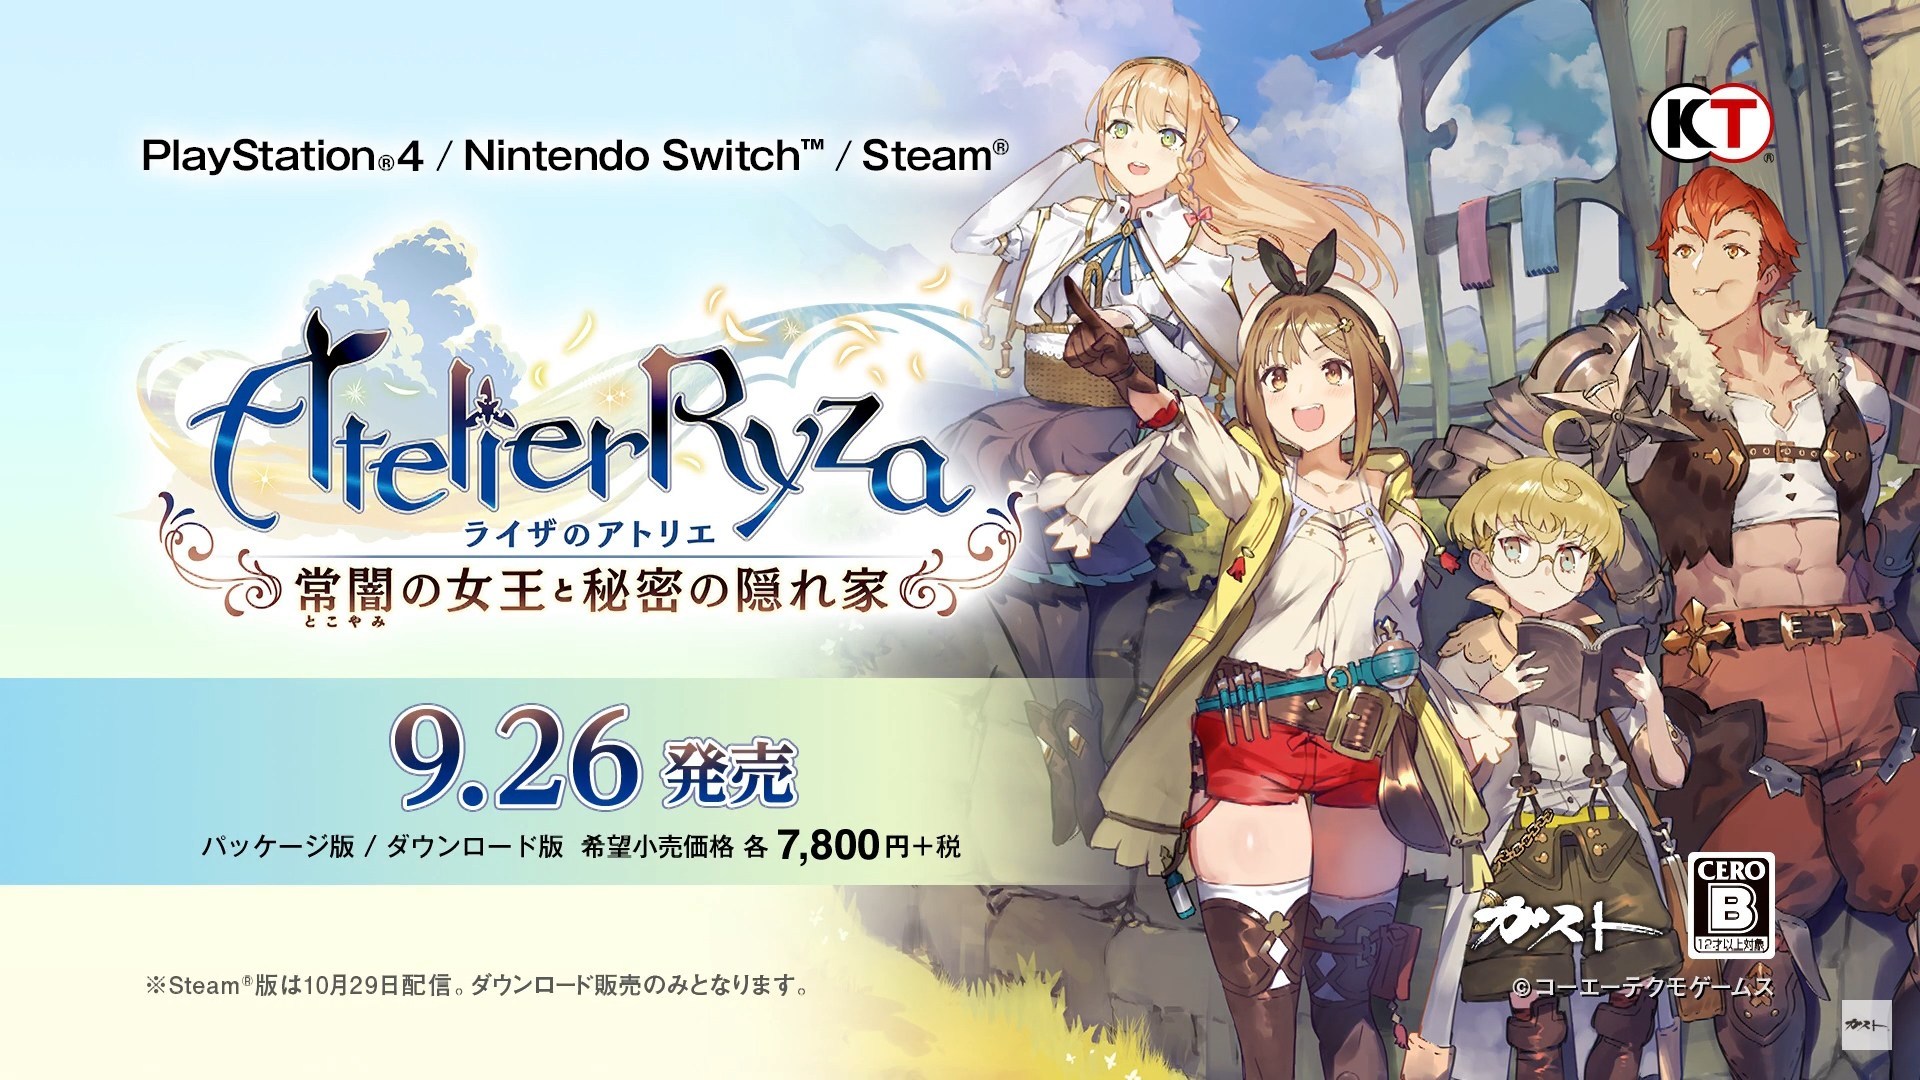 Chi tiết về hệ thống Gathering Synthesis trong game Atelier Ryza